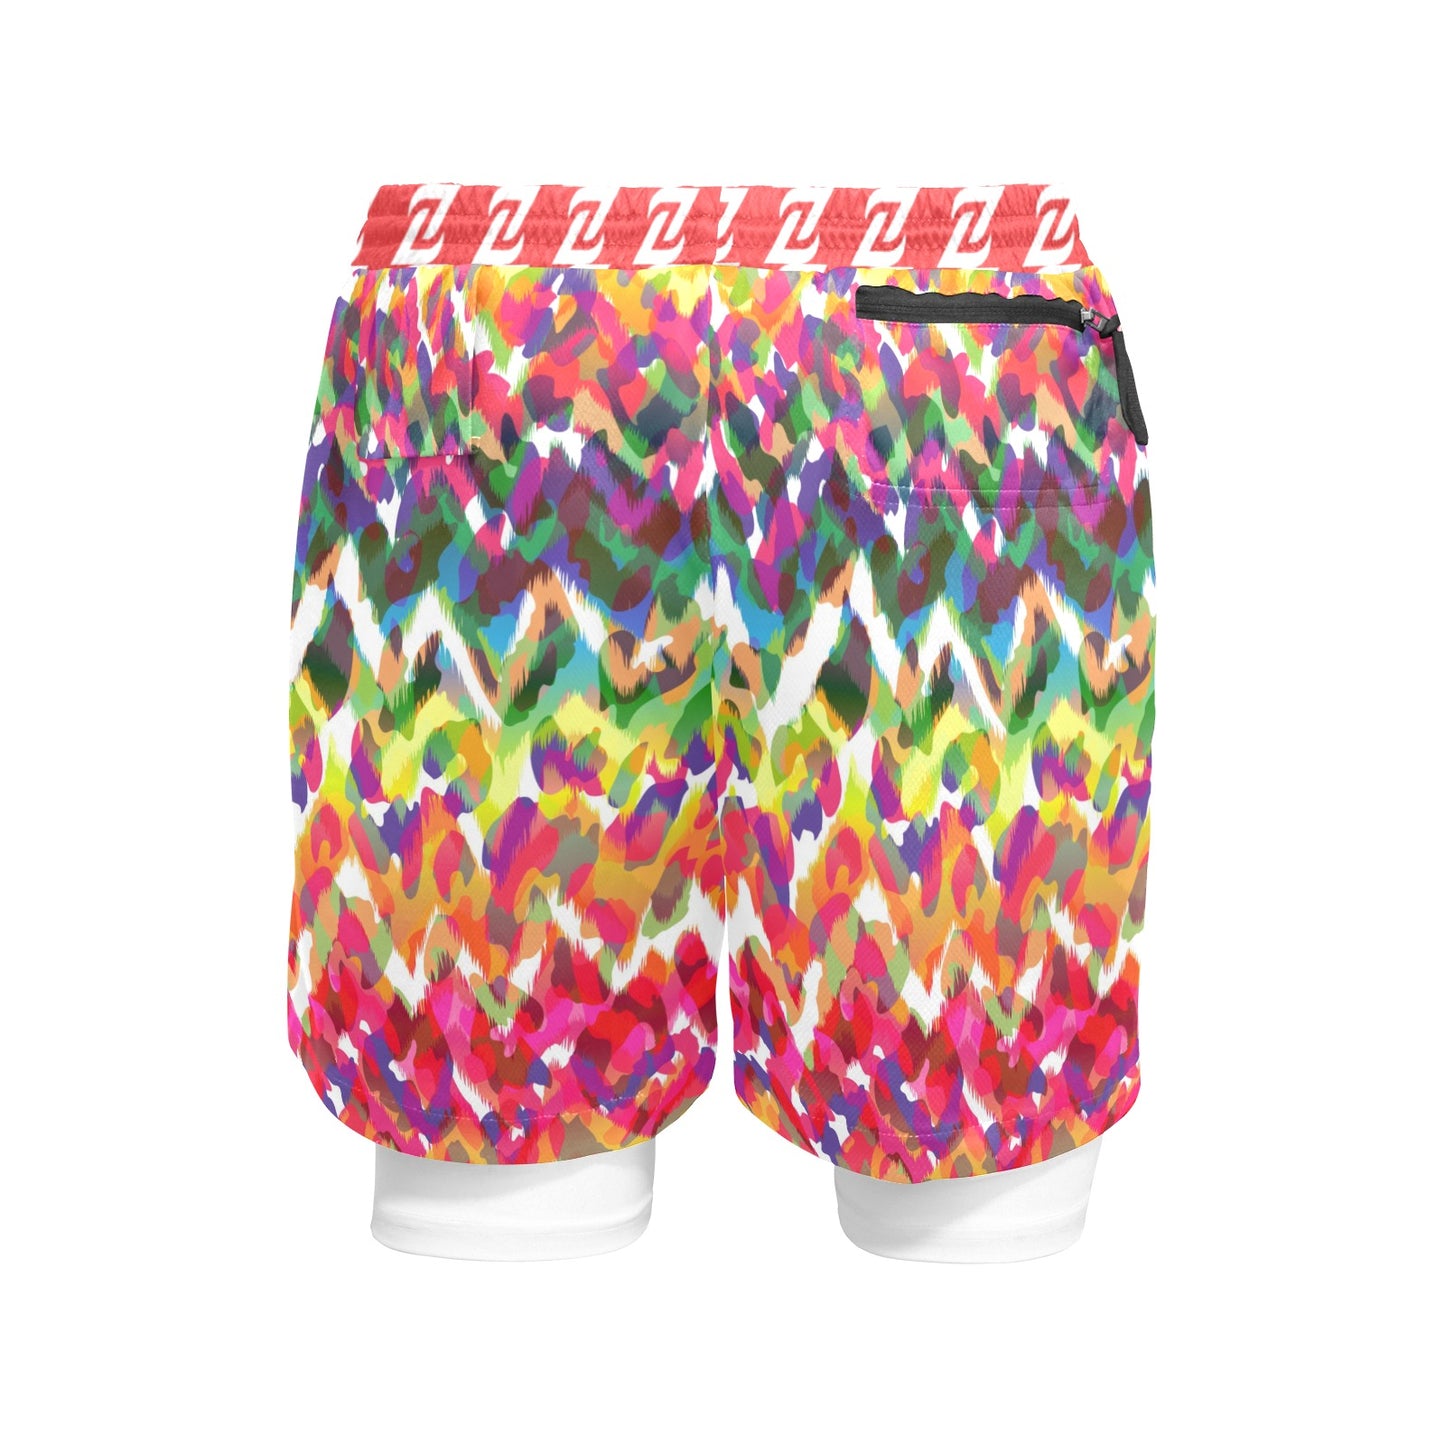 Zen Shorts with Liner - Confetti